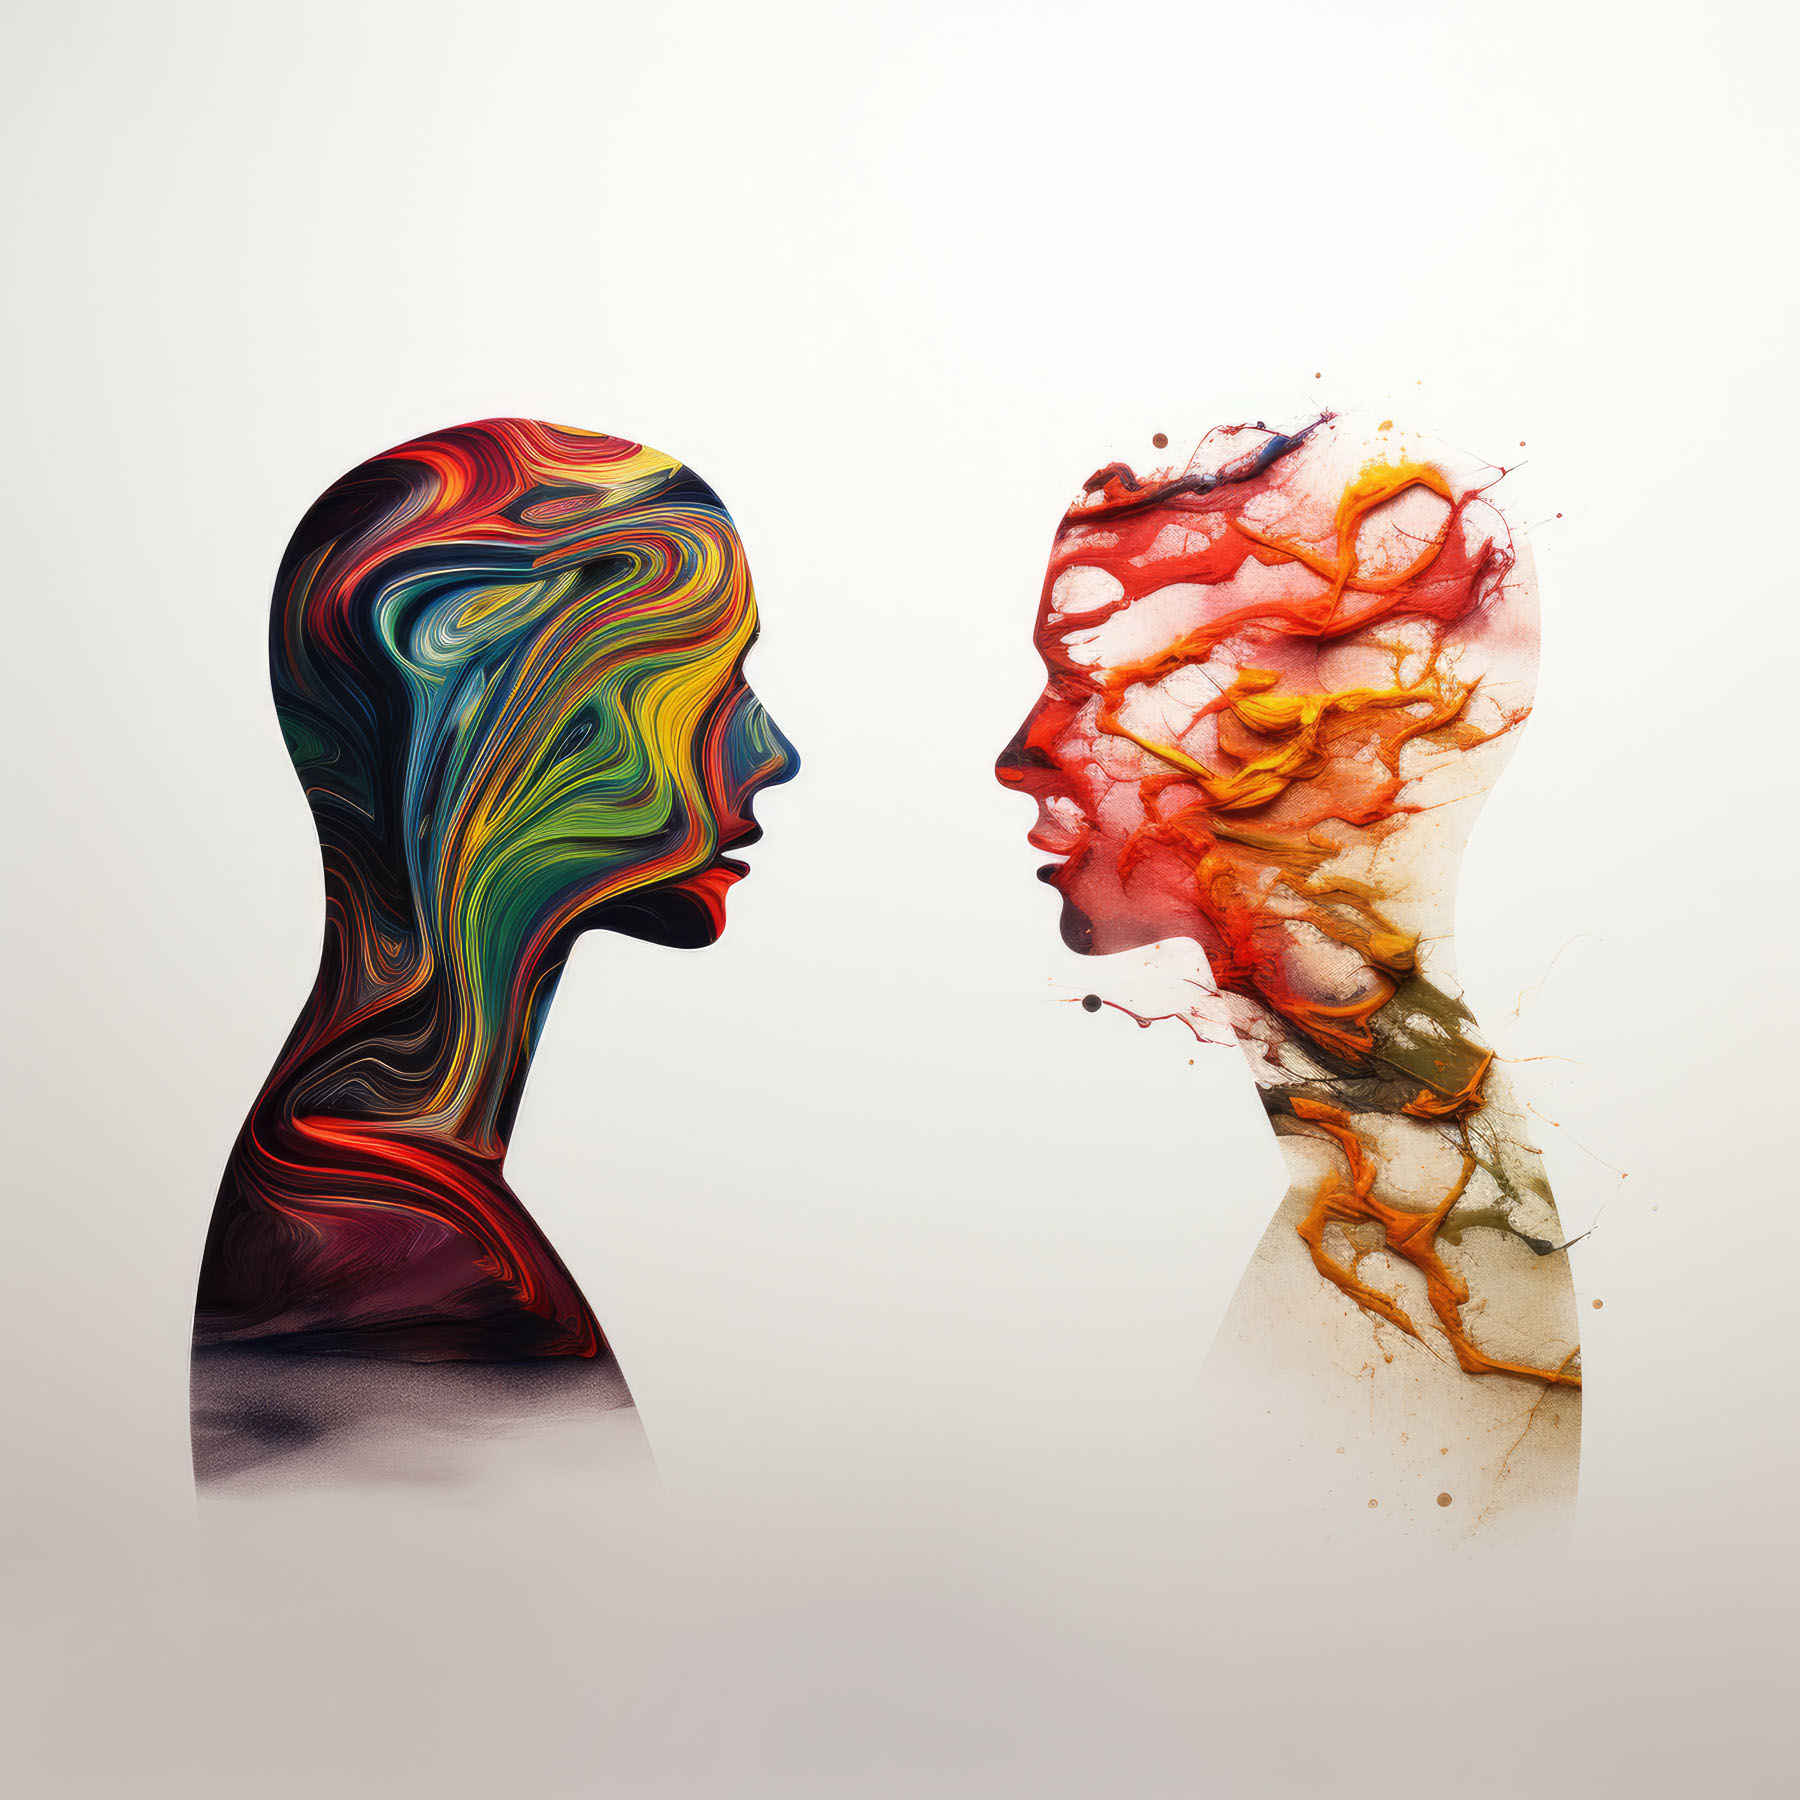 Two human profiles face each other. The one on the left is made of swirling paint-like colors, the one on the right disintegrating splotches of reds and oranges.